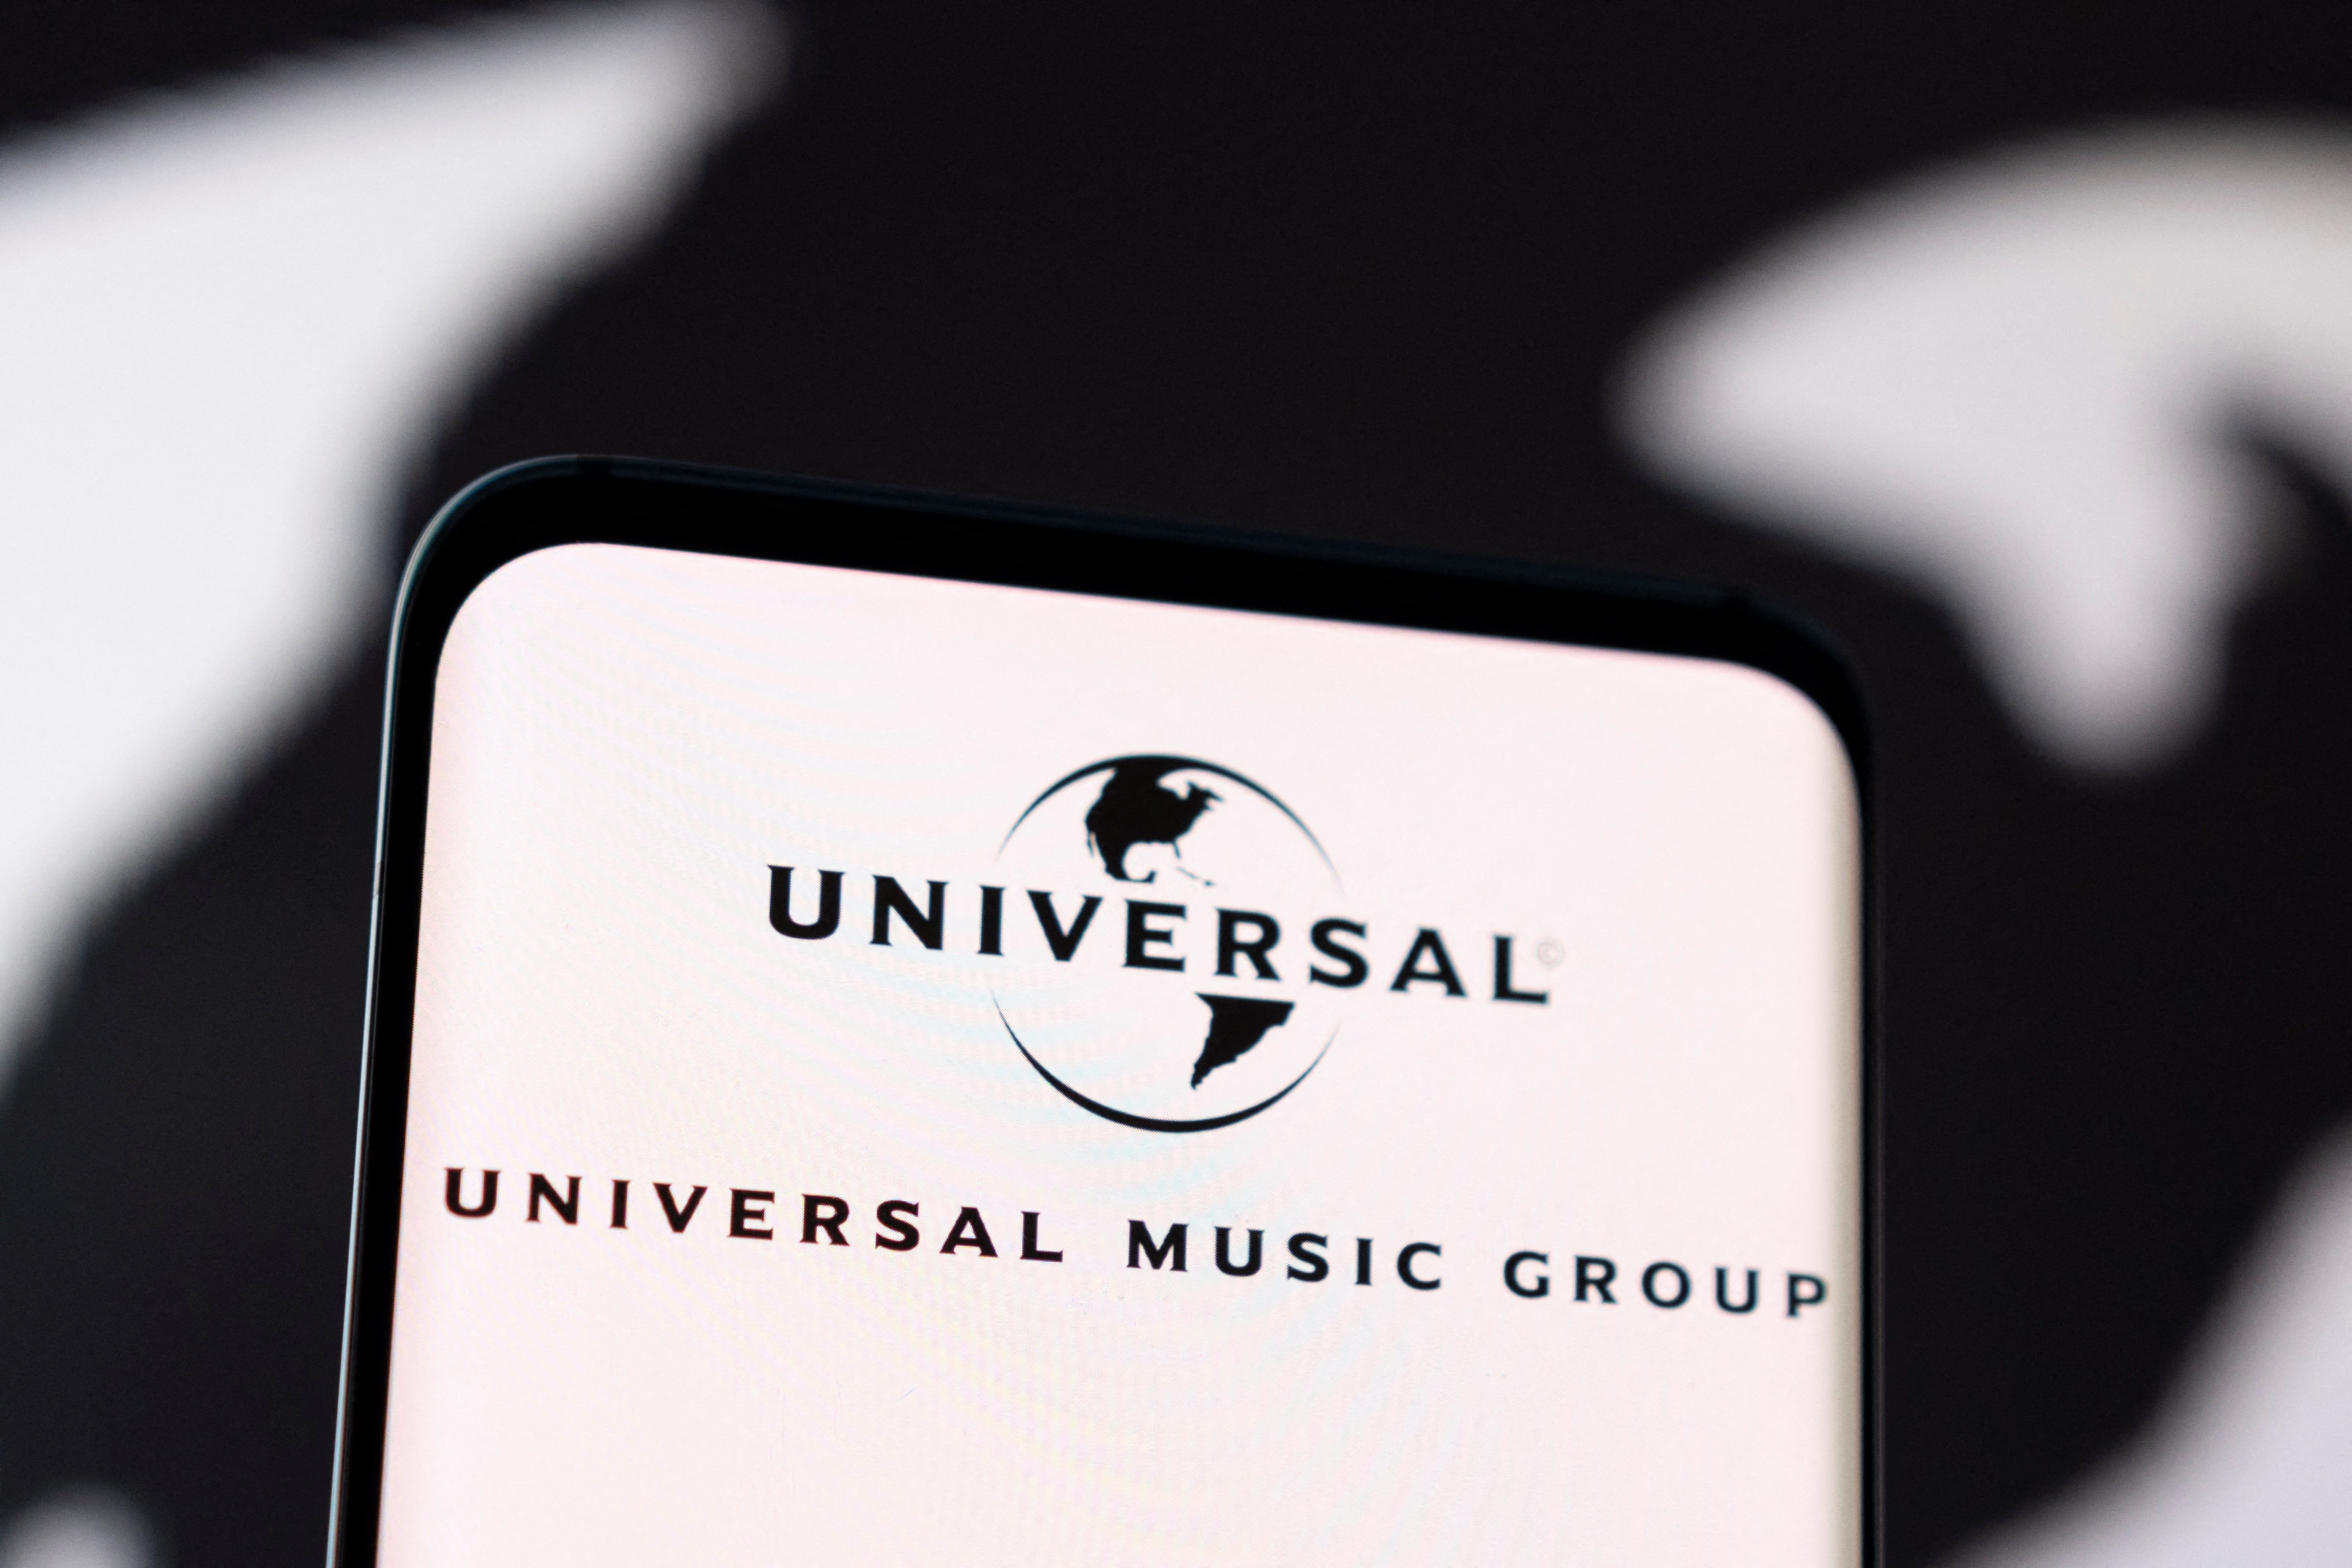 The illustration shows the Universal Music Group logo.